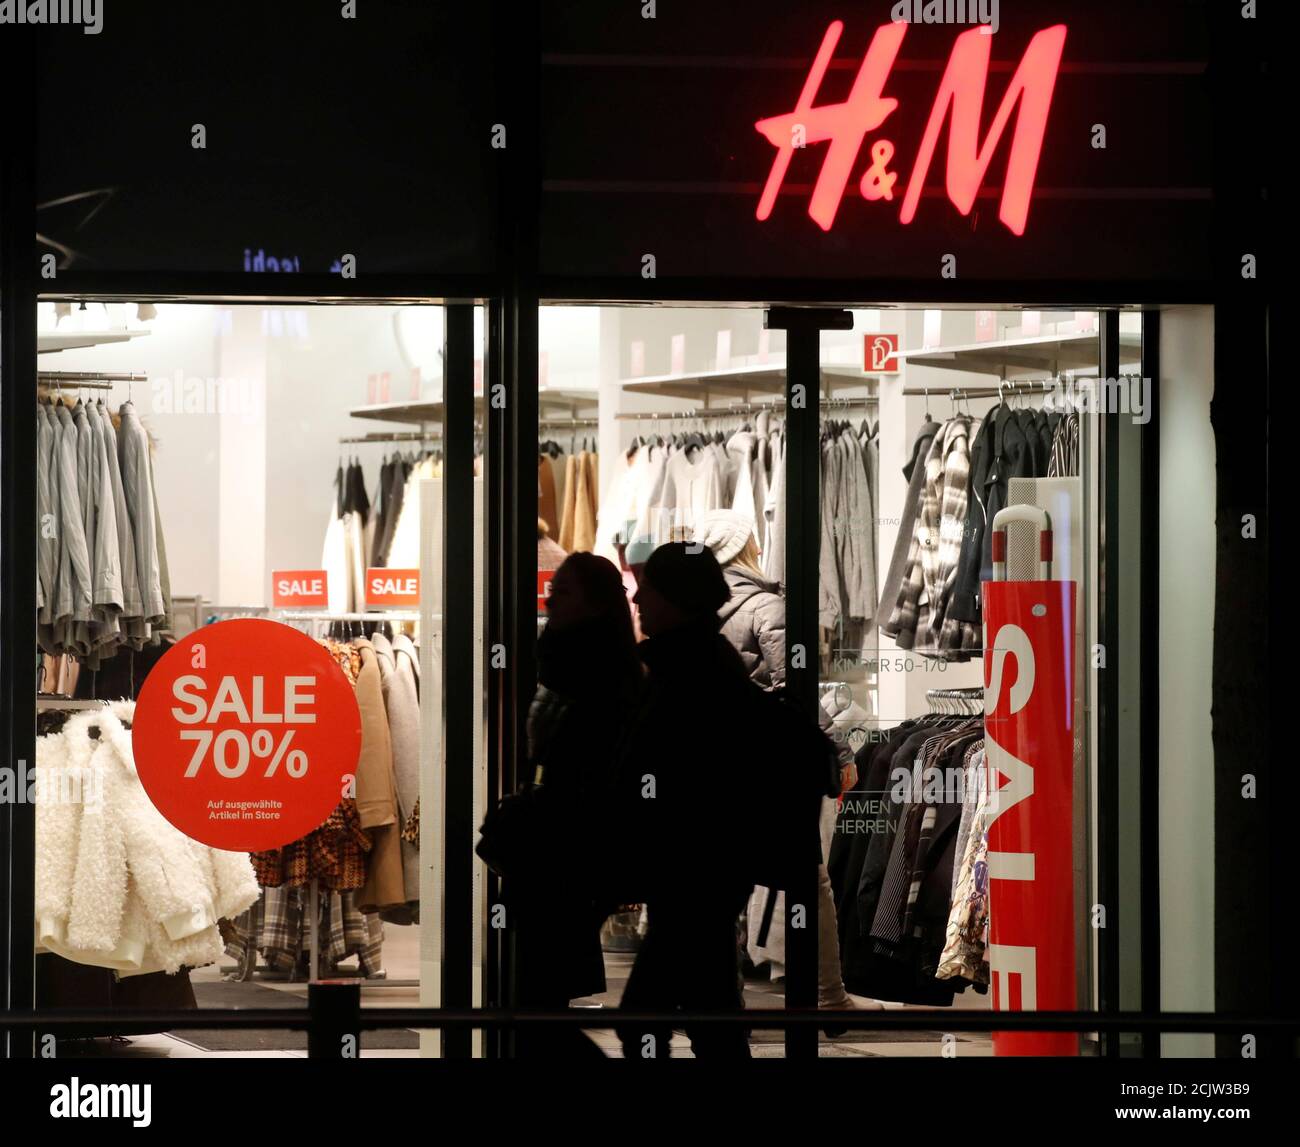 Sale discounts up to 70 percent are offered on a display window of a H&M  store in Zurich, Switzerland January 7, 2019. Picture taken January 7,  2019. REUTERS/Arnd Wiegmann Stock Photo - Alamy